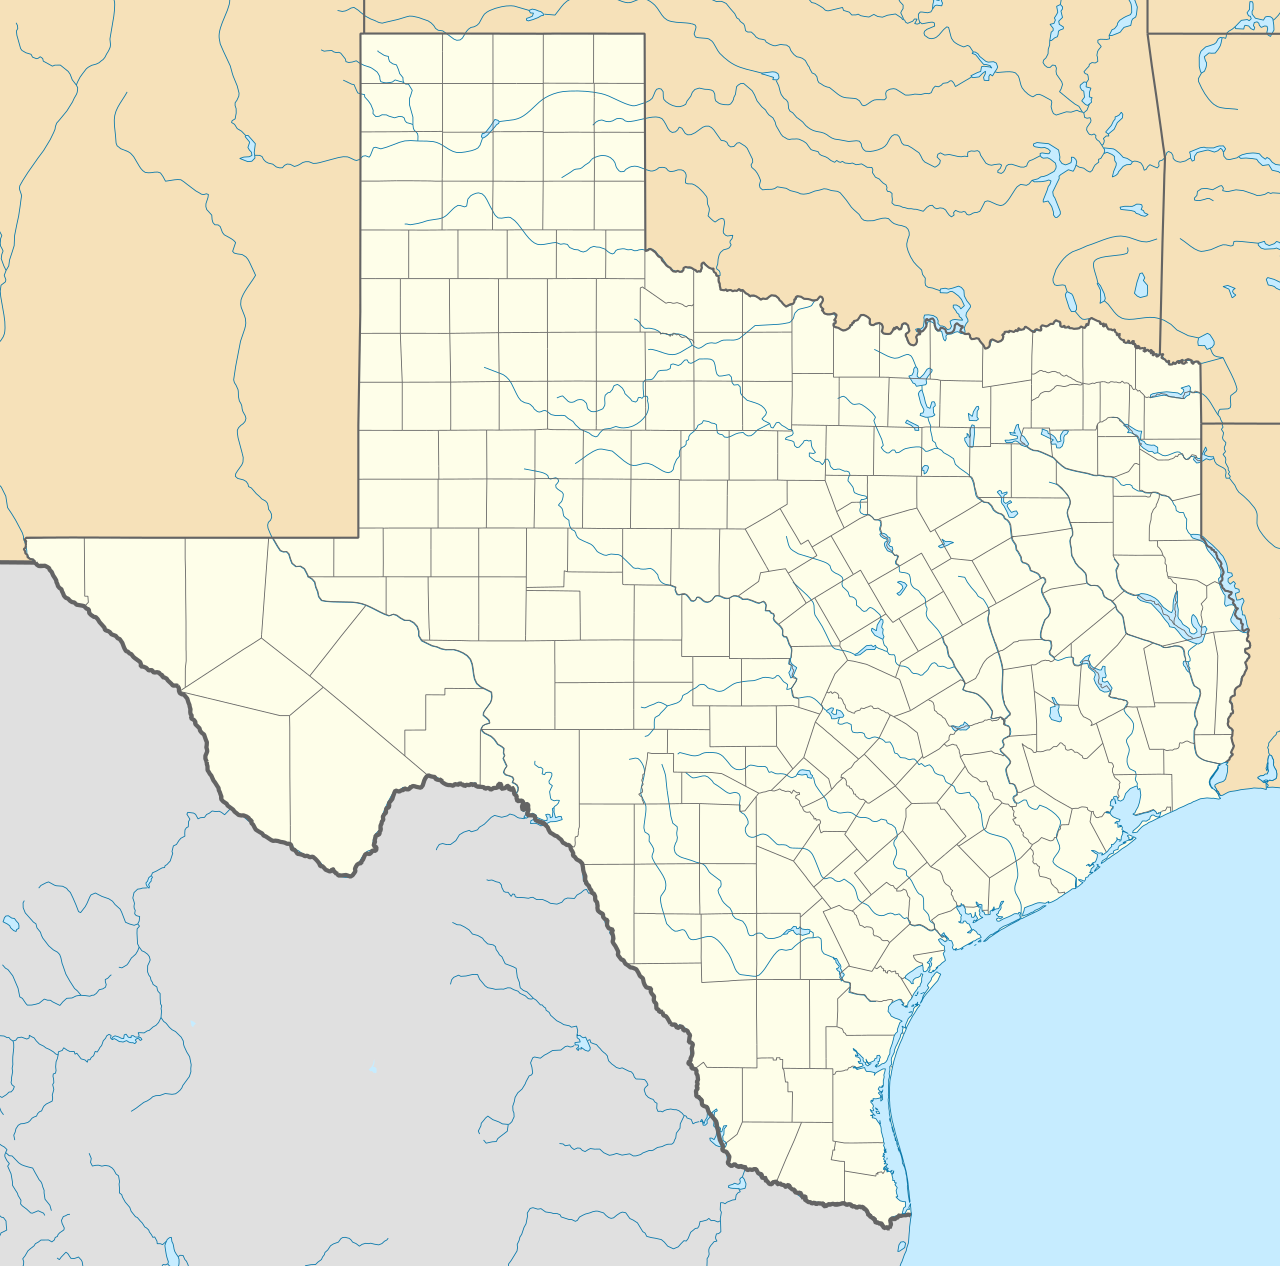 Sports in Texas is located in Texas